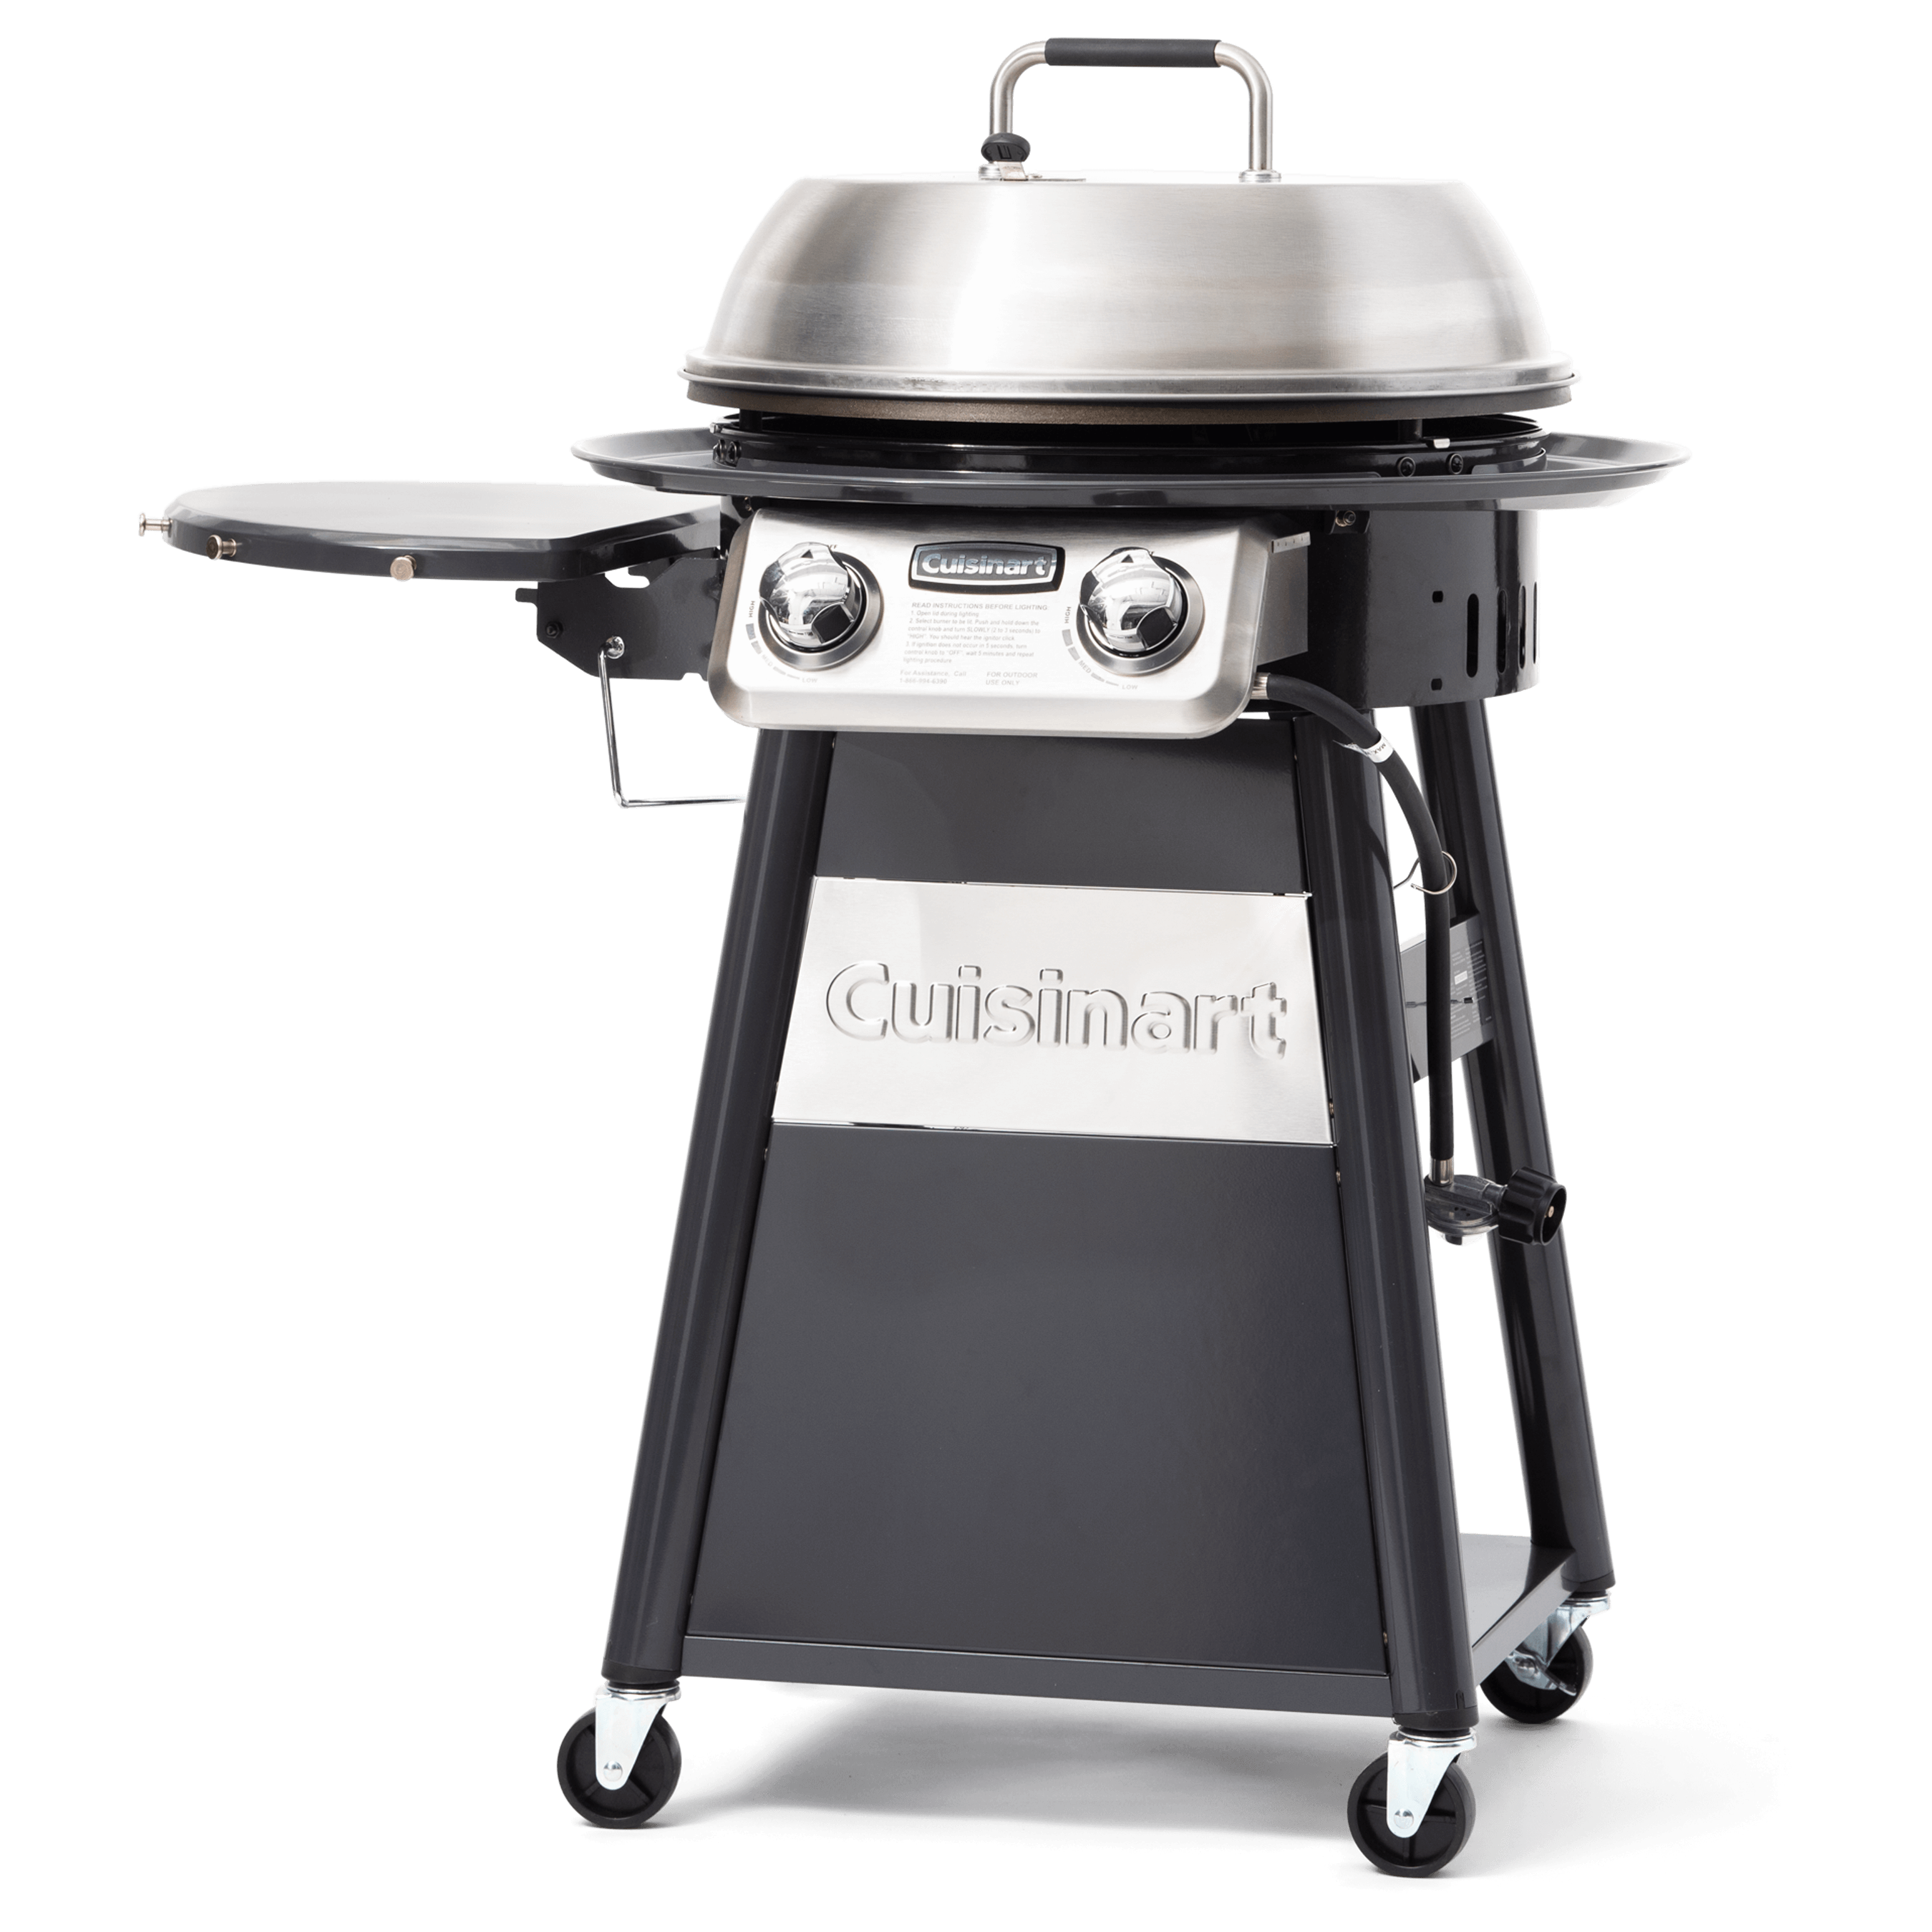 https://res.cloudinary.com/hksqkdlah/image/upload/SIL_Cuisinart_360Griddle-Cooking-Center_5246_qm9r0f.png